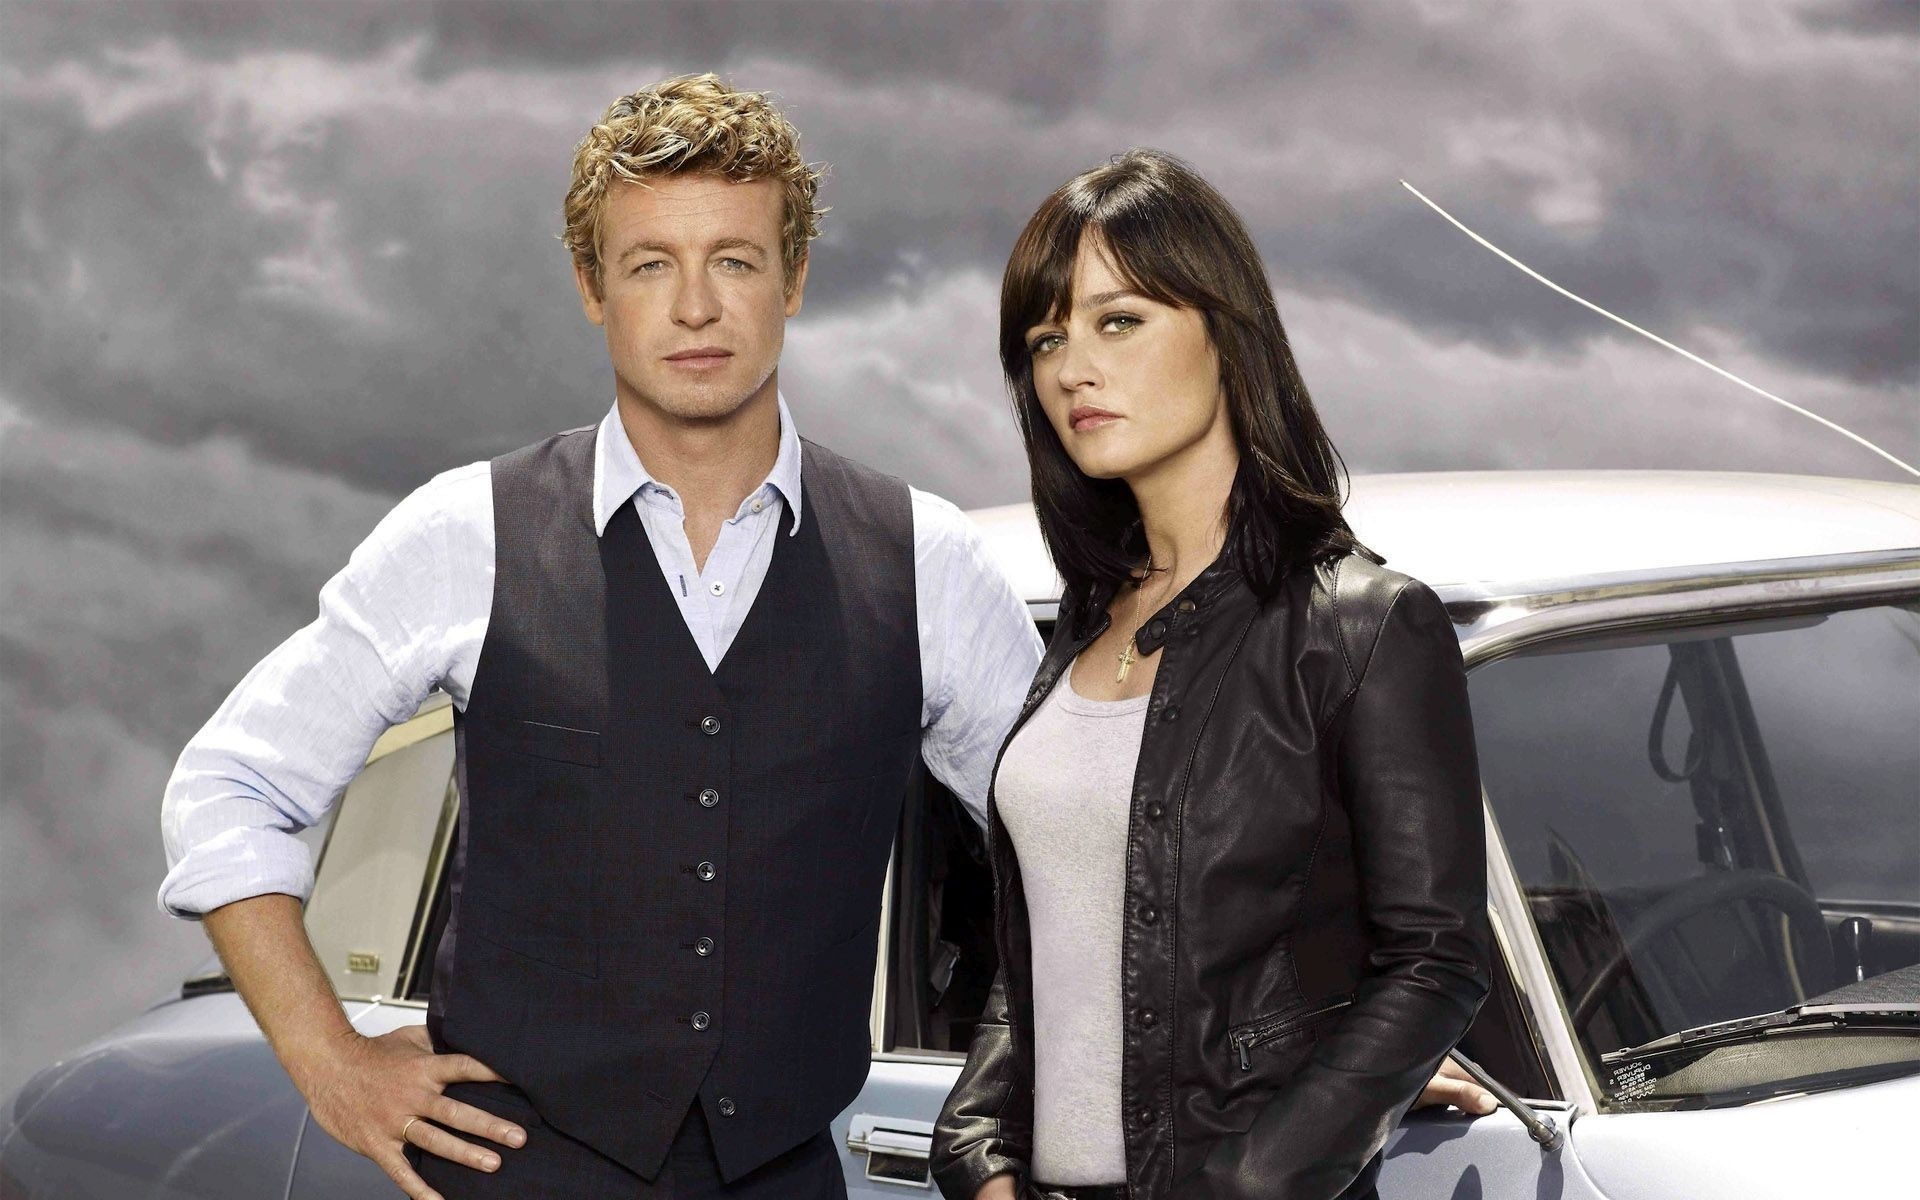 The Mentalist Wallpapers - Top Free The Mentalist Backgrounds 1920x1200